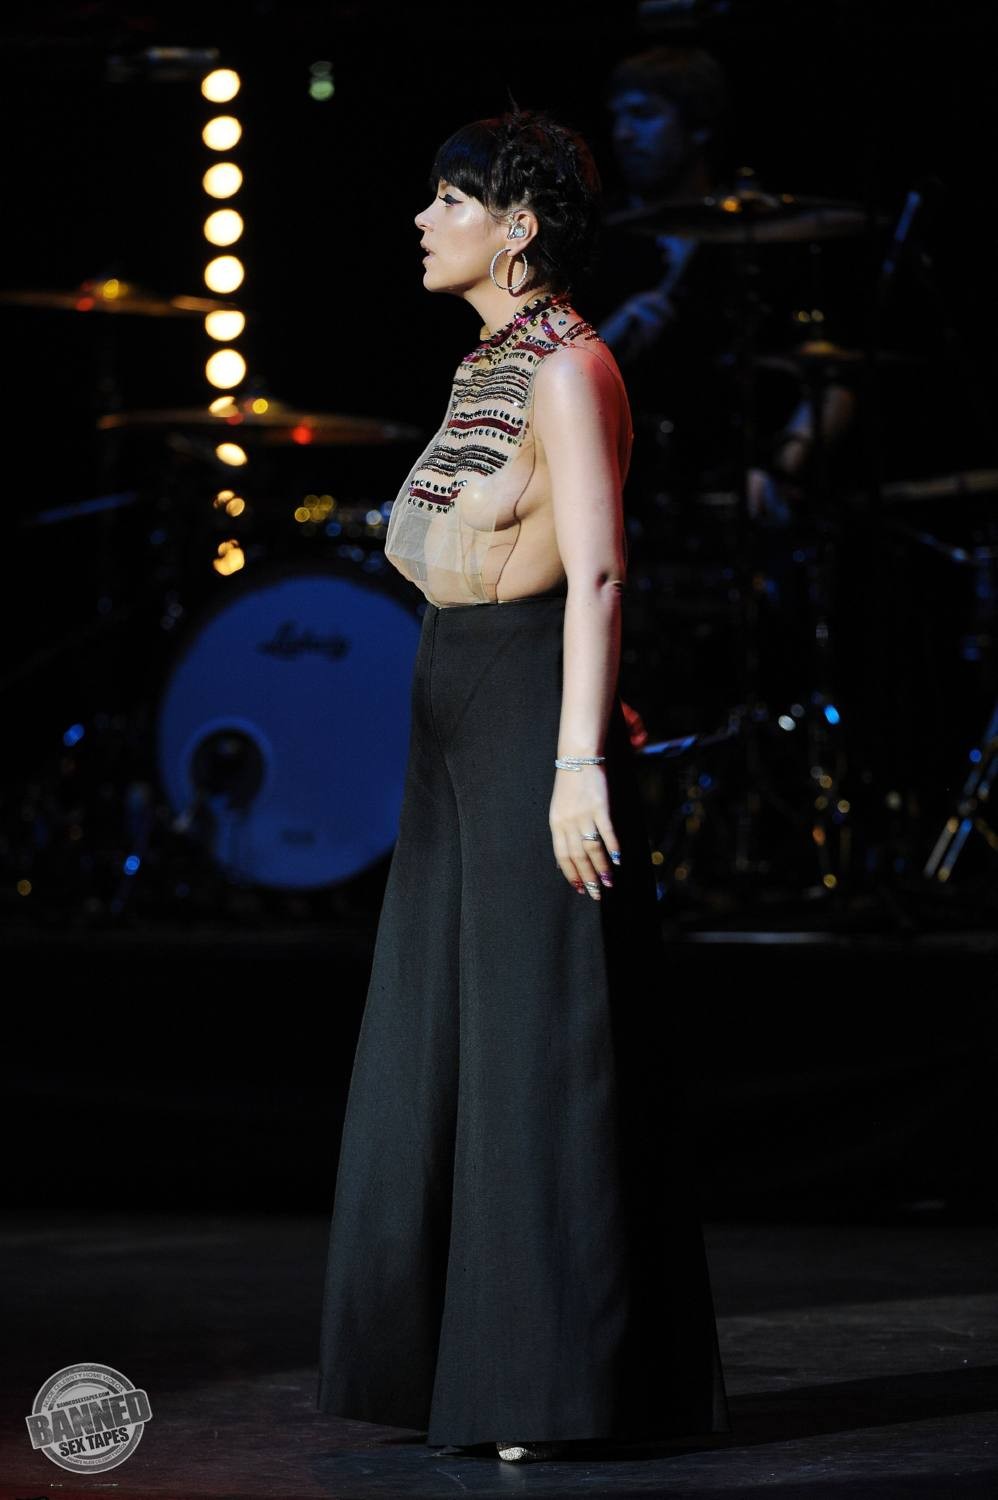 Lily Allen  see her nude tits through transparent top during concert #75191575